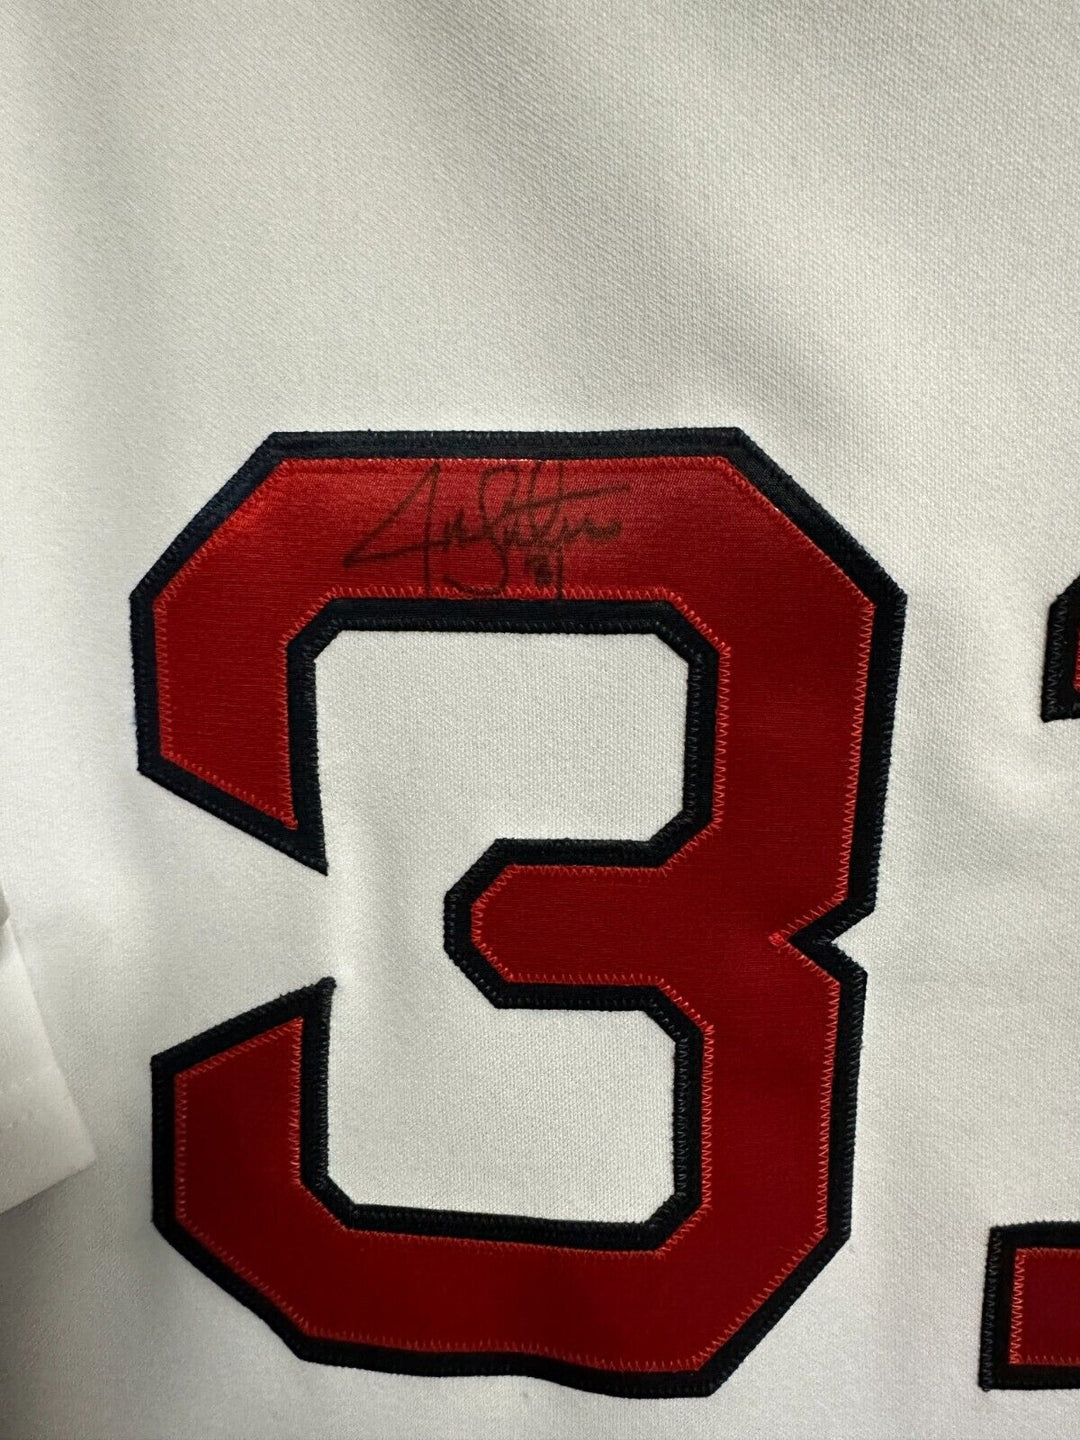 Jon Lester Autographed Authentic Boston Red Sox Home White Jersey MAB Hologram